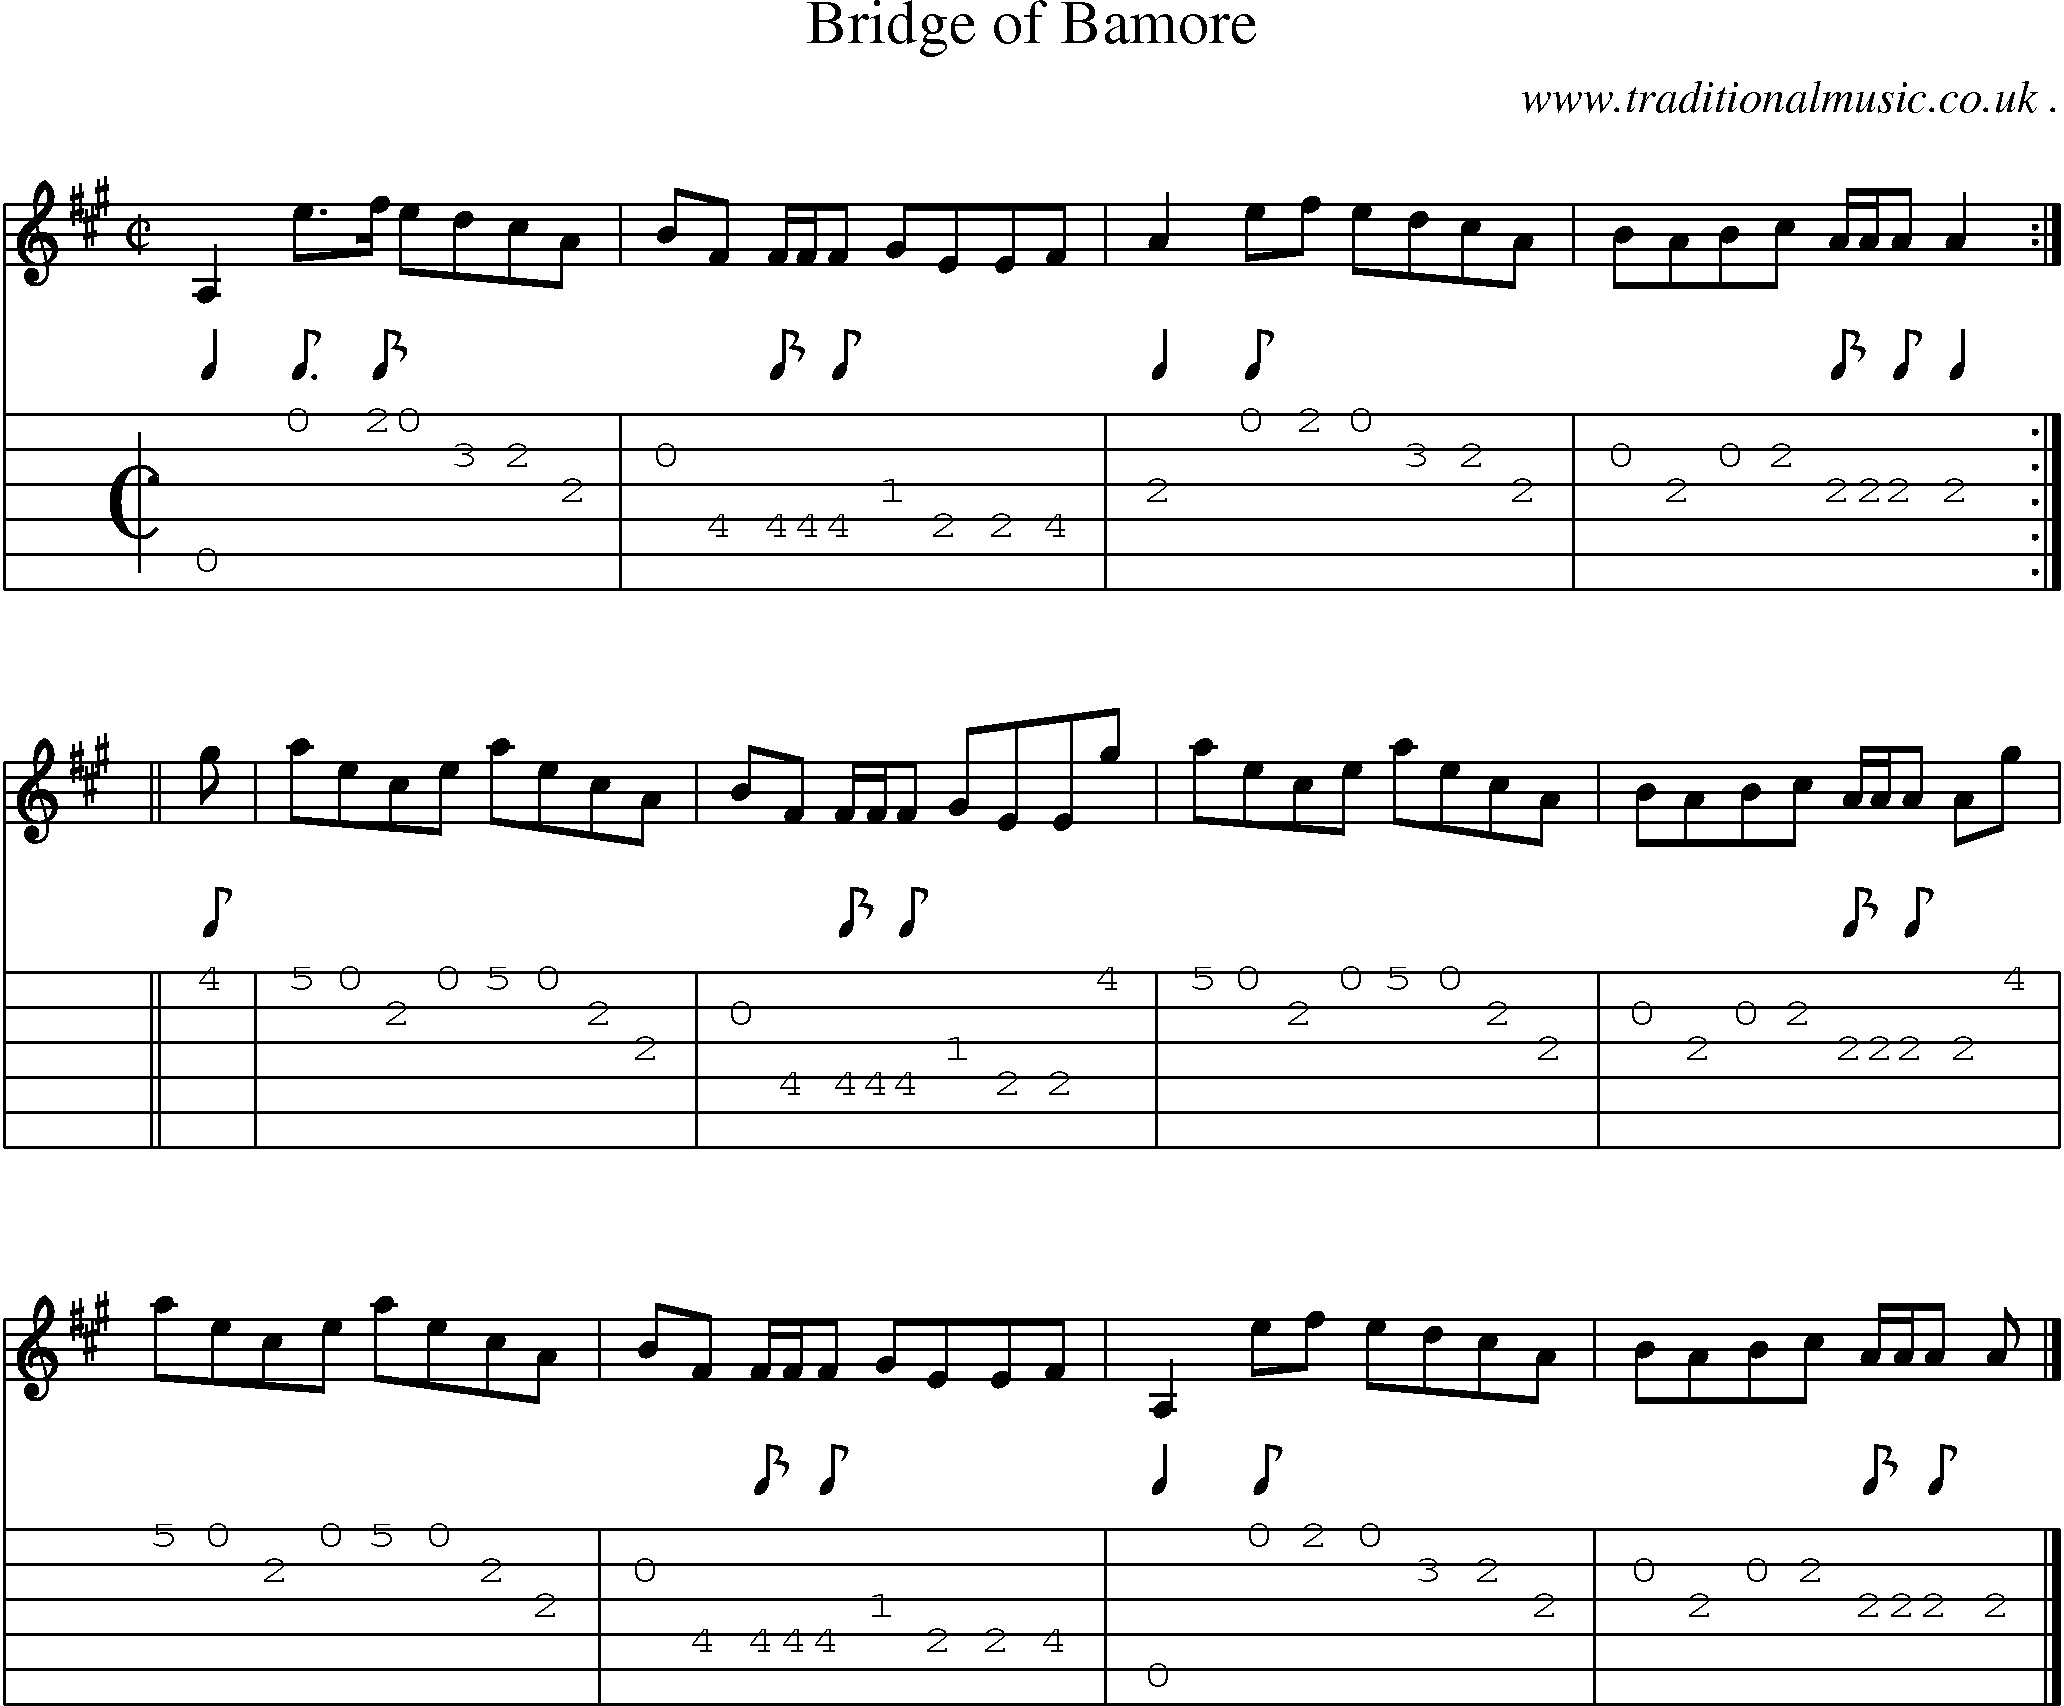 Sheet-music  score, Chords and Guitar Tabs for Bridge Of Bamore